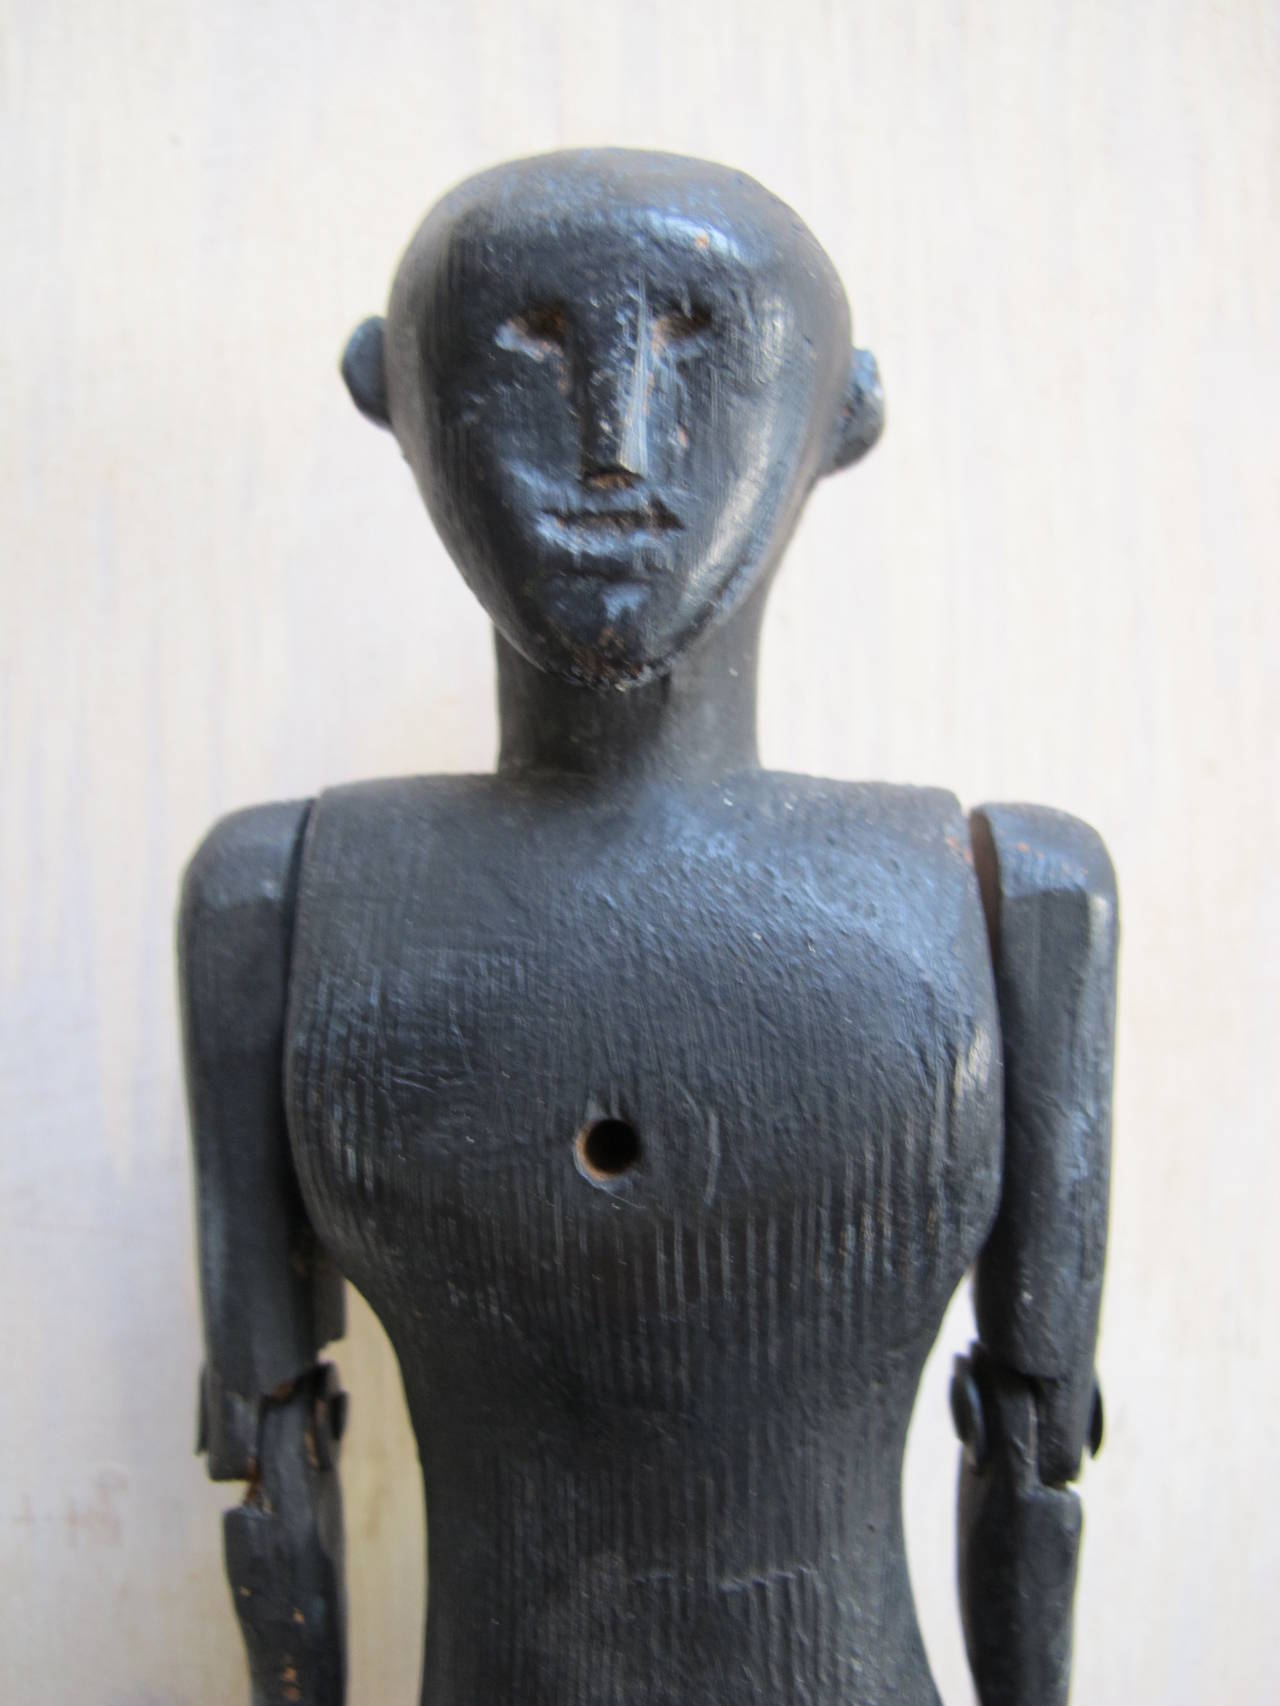 An early American dancing toy figure of carved and painted wood. The carved face has a strong face with simplified features. The arms and legs can move freely and the chest has a hole through it so that a stick or stiff wire can be inserted from the